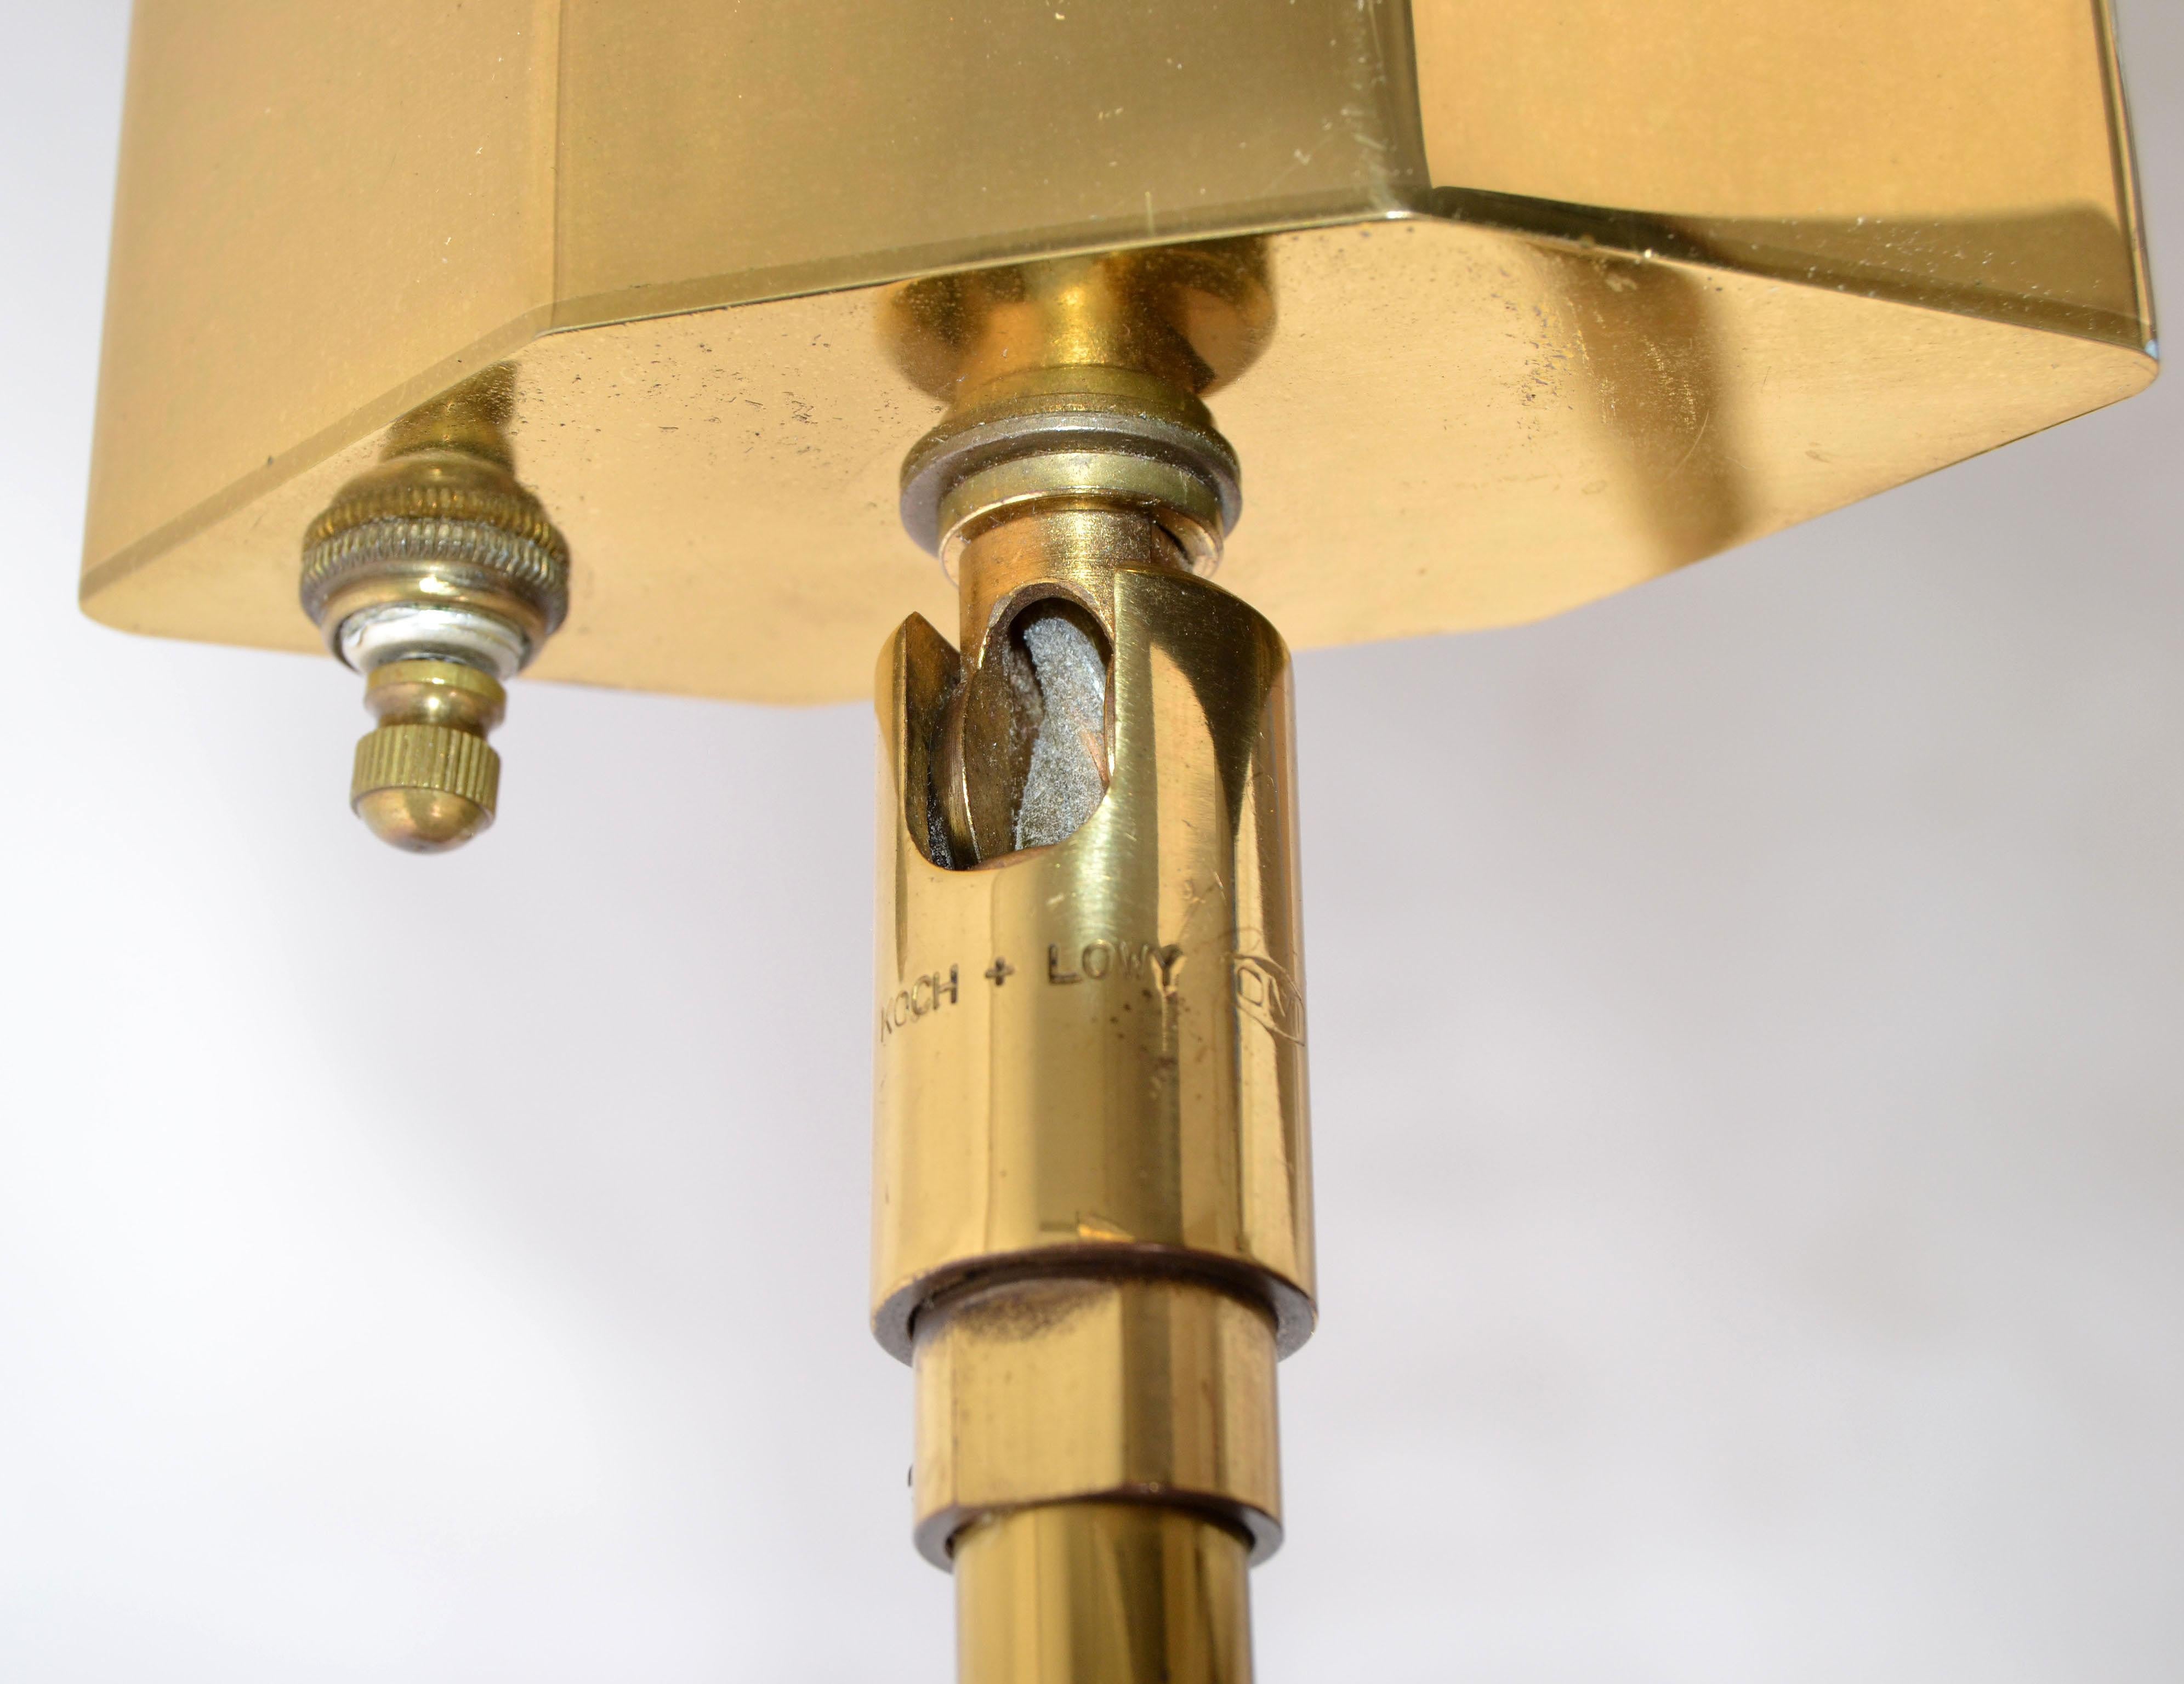 Original Koch & Lowy Articulated Polished Brass Floor Lamp Mid-Century Modern In Good Condition For Sale In Miami, FL